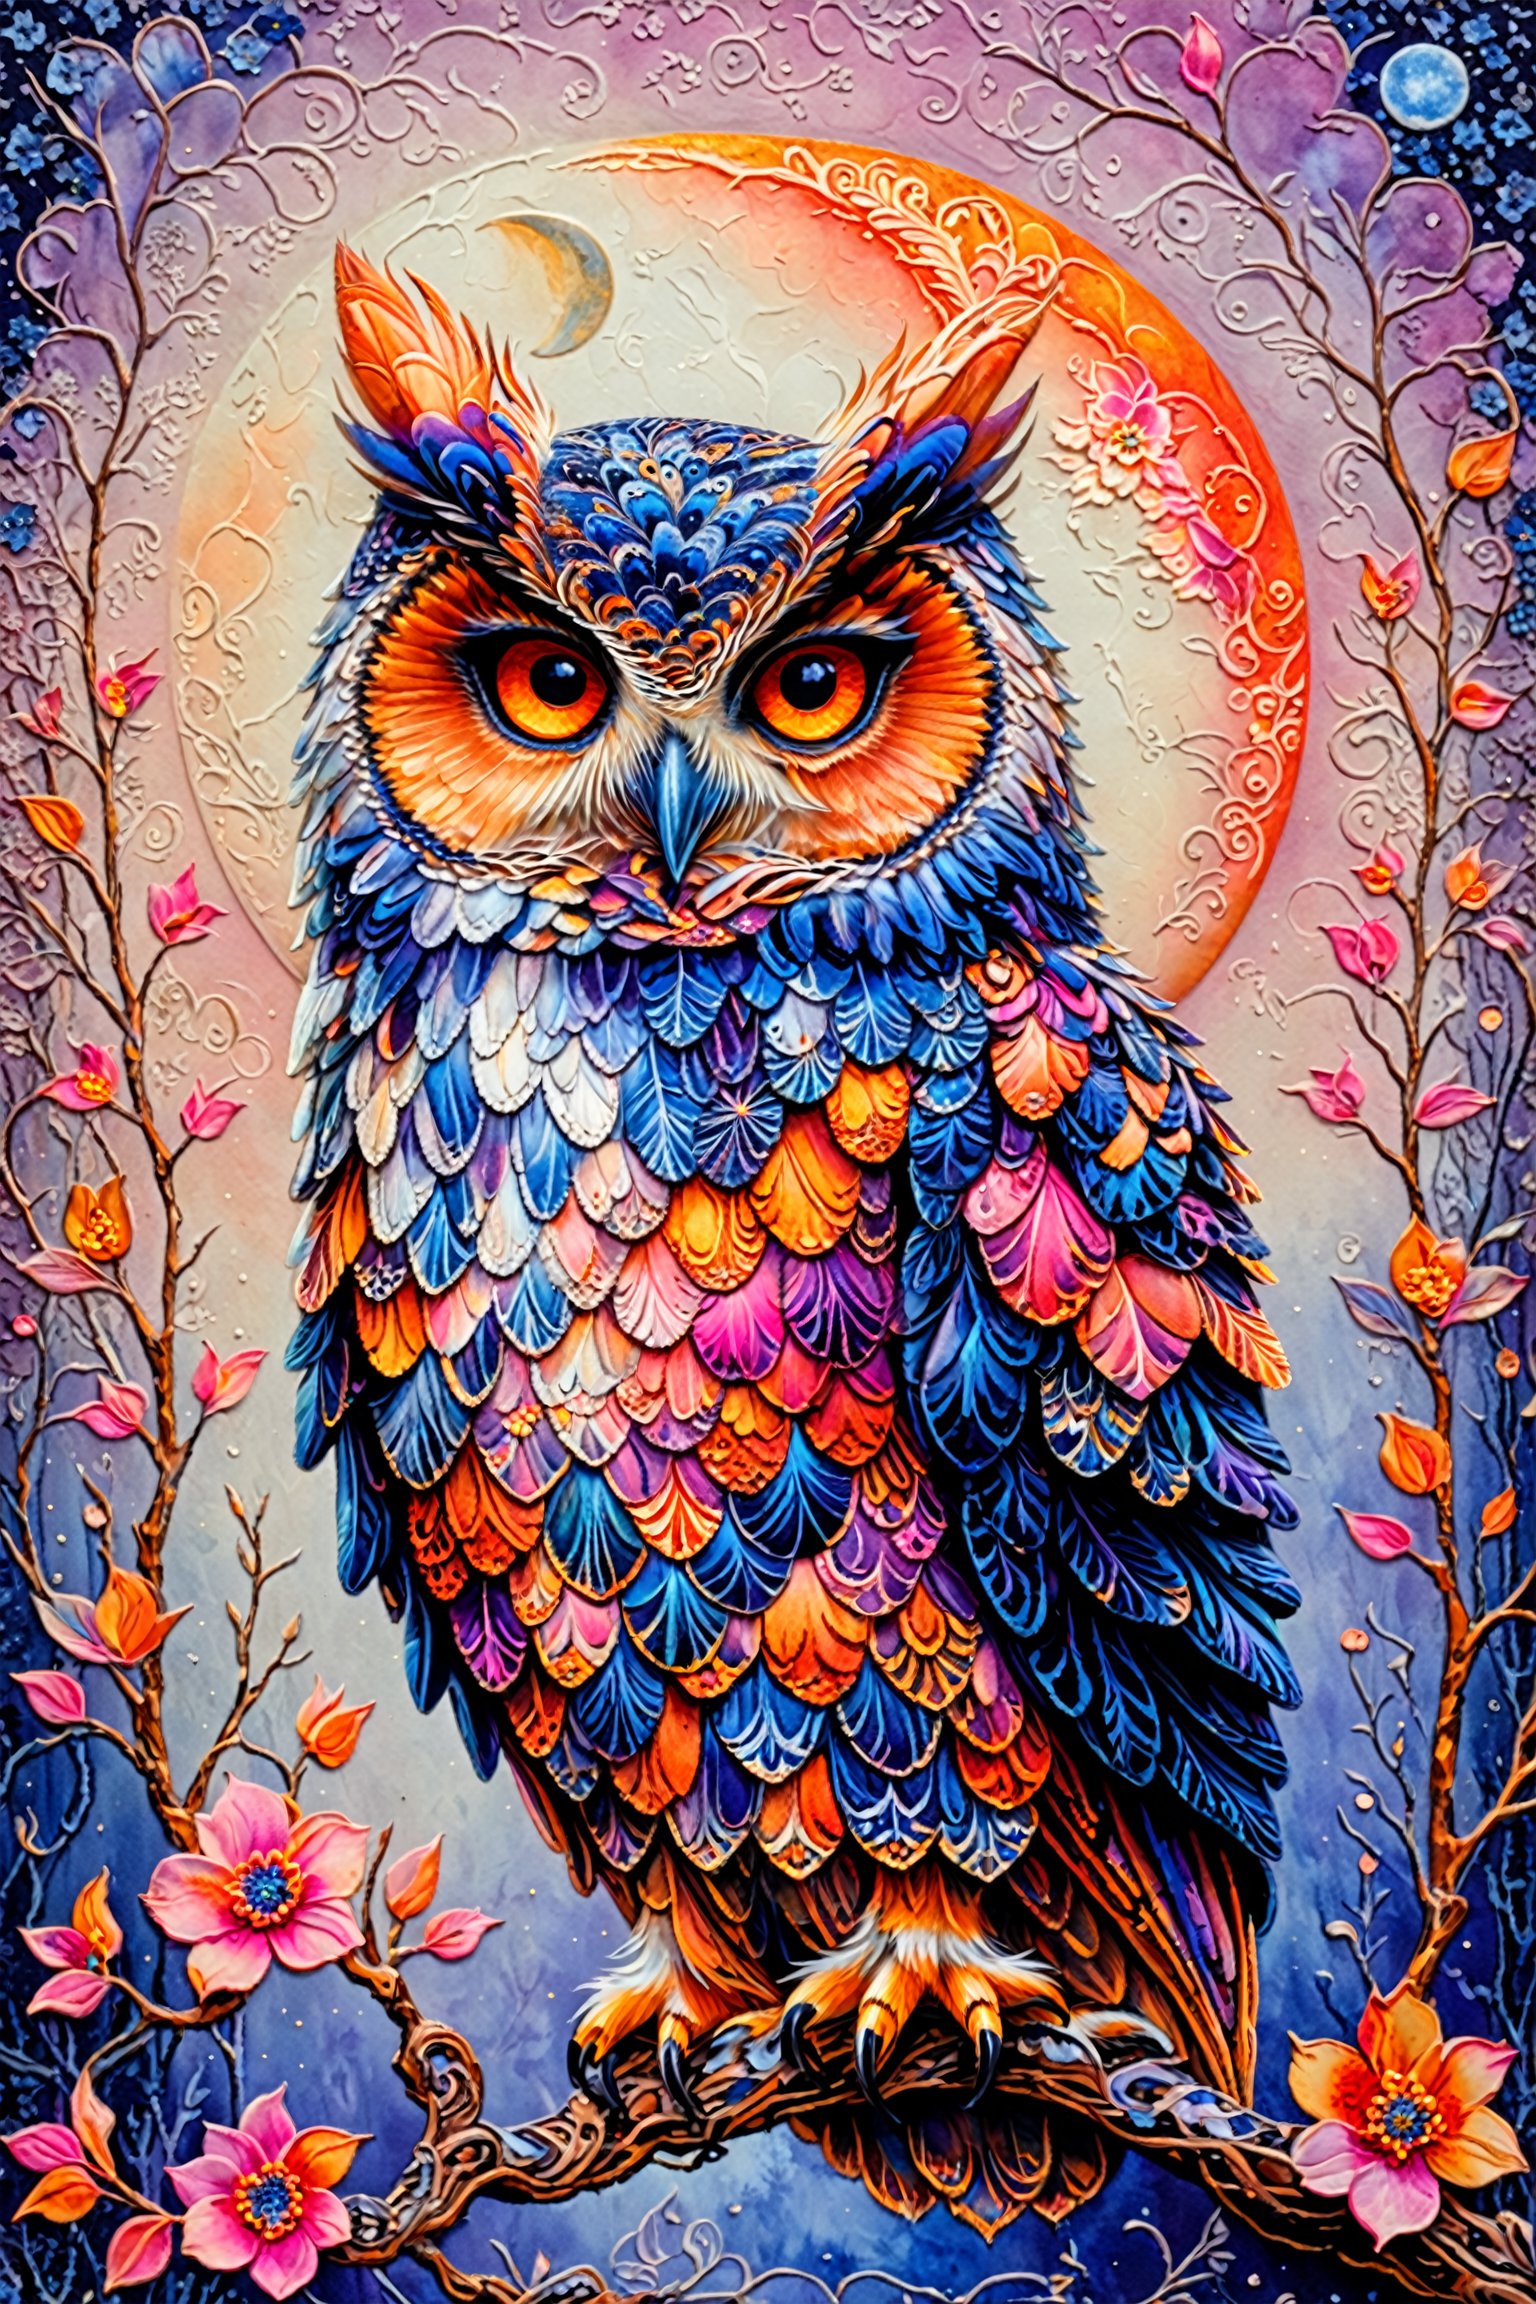 A vibrantly colored owl perched on a branch. The owl's feathers display a myriad of hues, from blues and purples to oranges and whites. It has intense, round orange eyes. The background is adorned with intricate patterns and motifs, with a pale, almost silvery moon or celestial body in the background. Branches with delicate pink and orange flowers extend from the owl, adding a touch of nature to the scene. The entire composition exudes a dreamy, mystical aura.